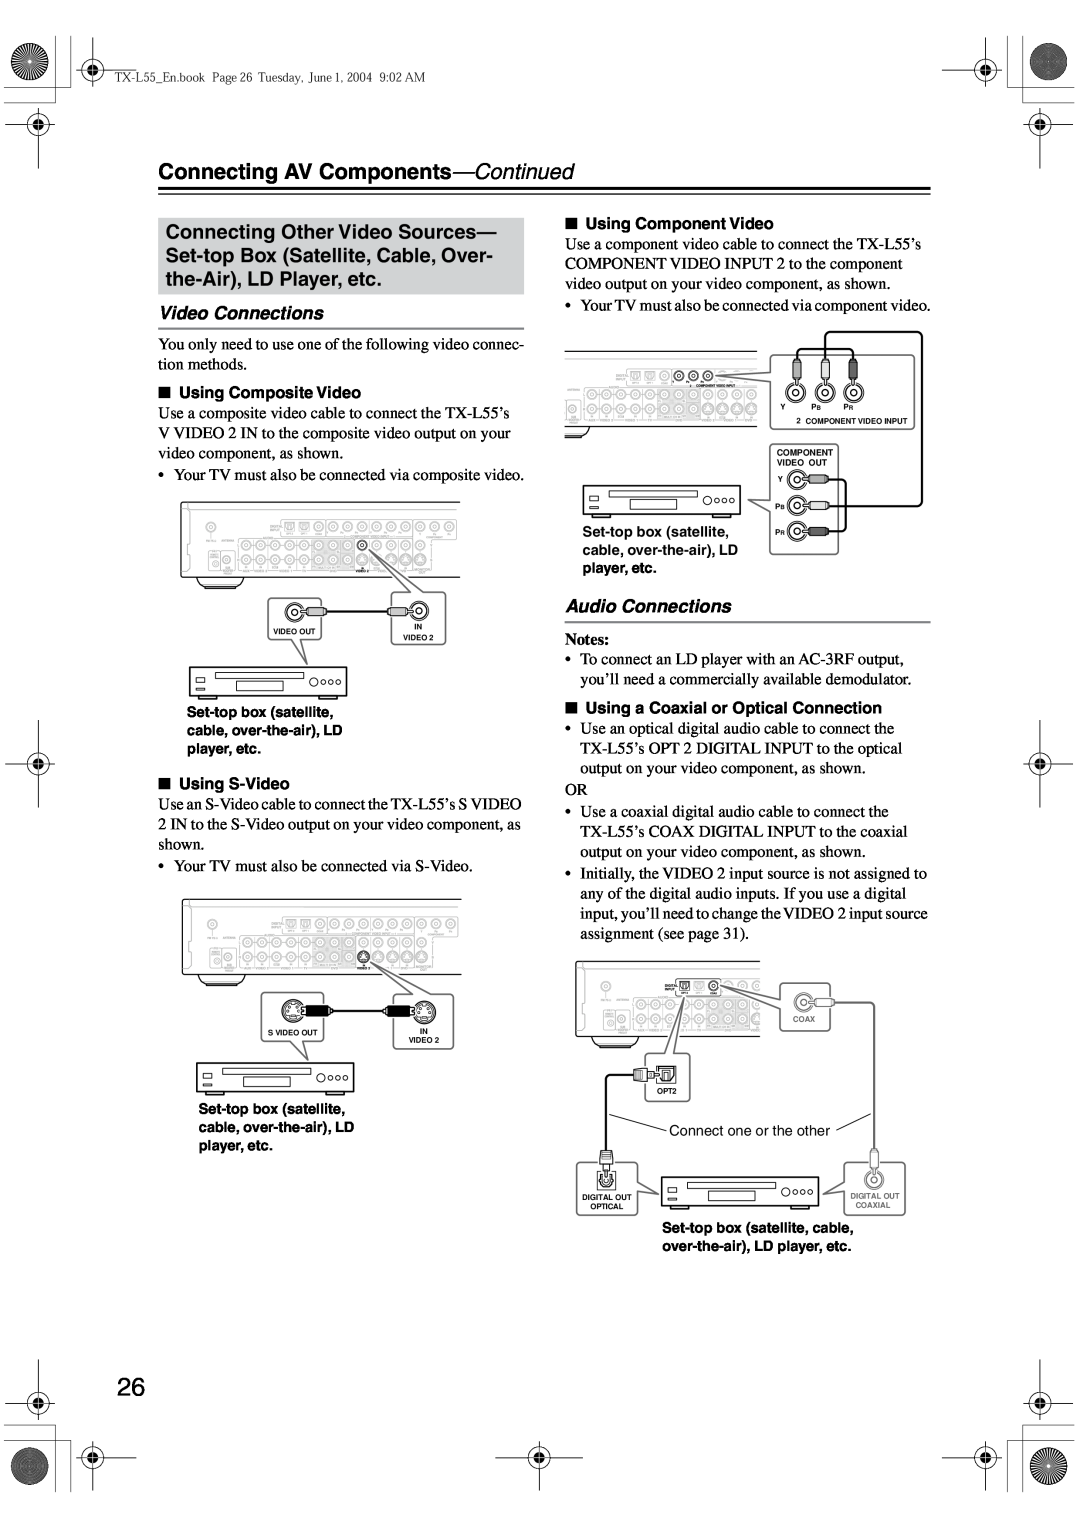 Onkyo TX-L55 instruction manual Connecting AV Components-Continued, Video Connections, Audio Connections 